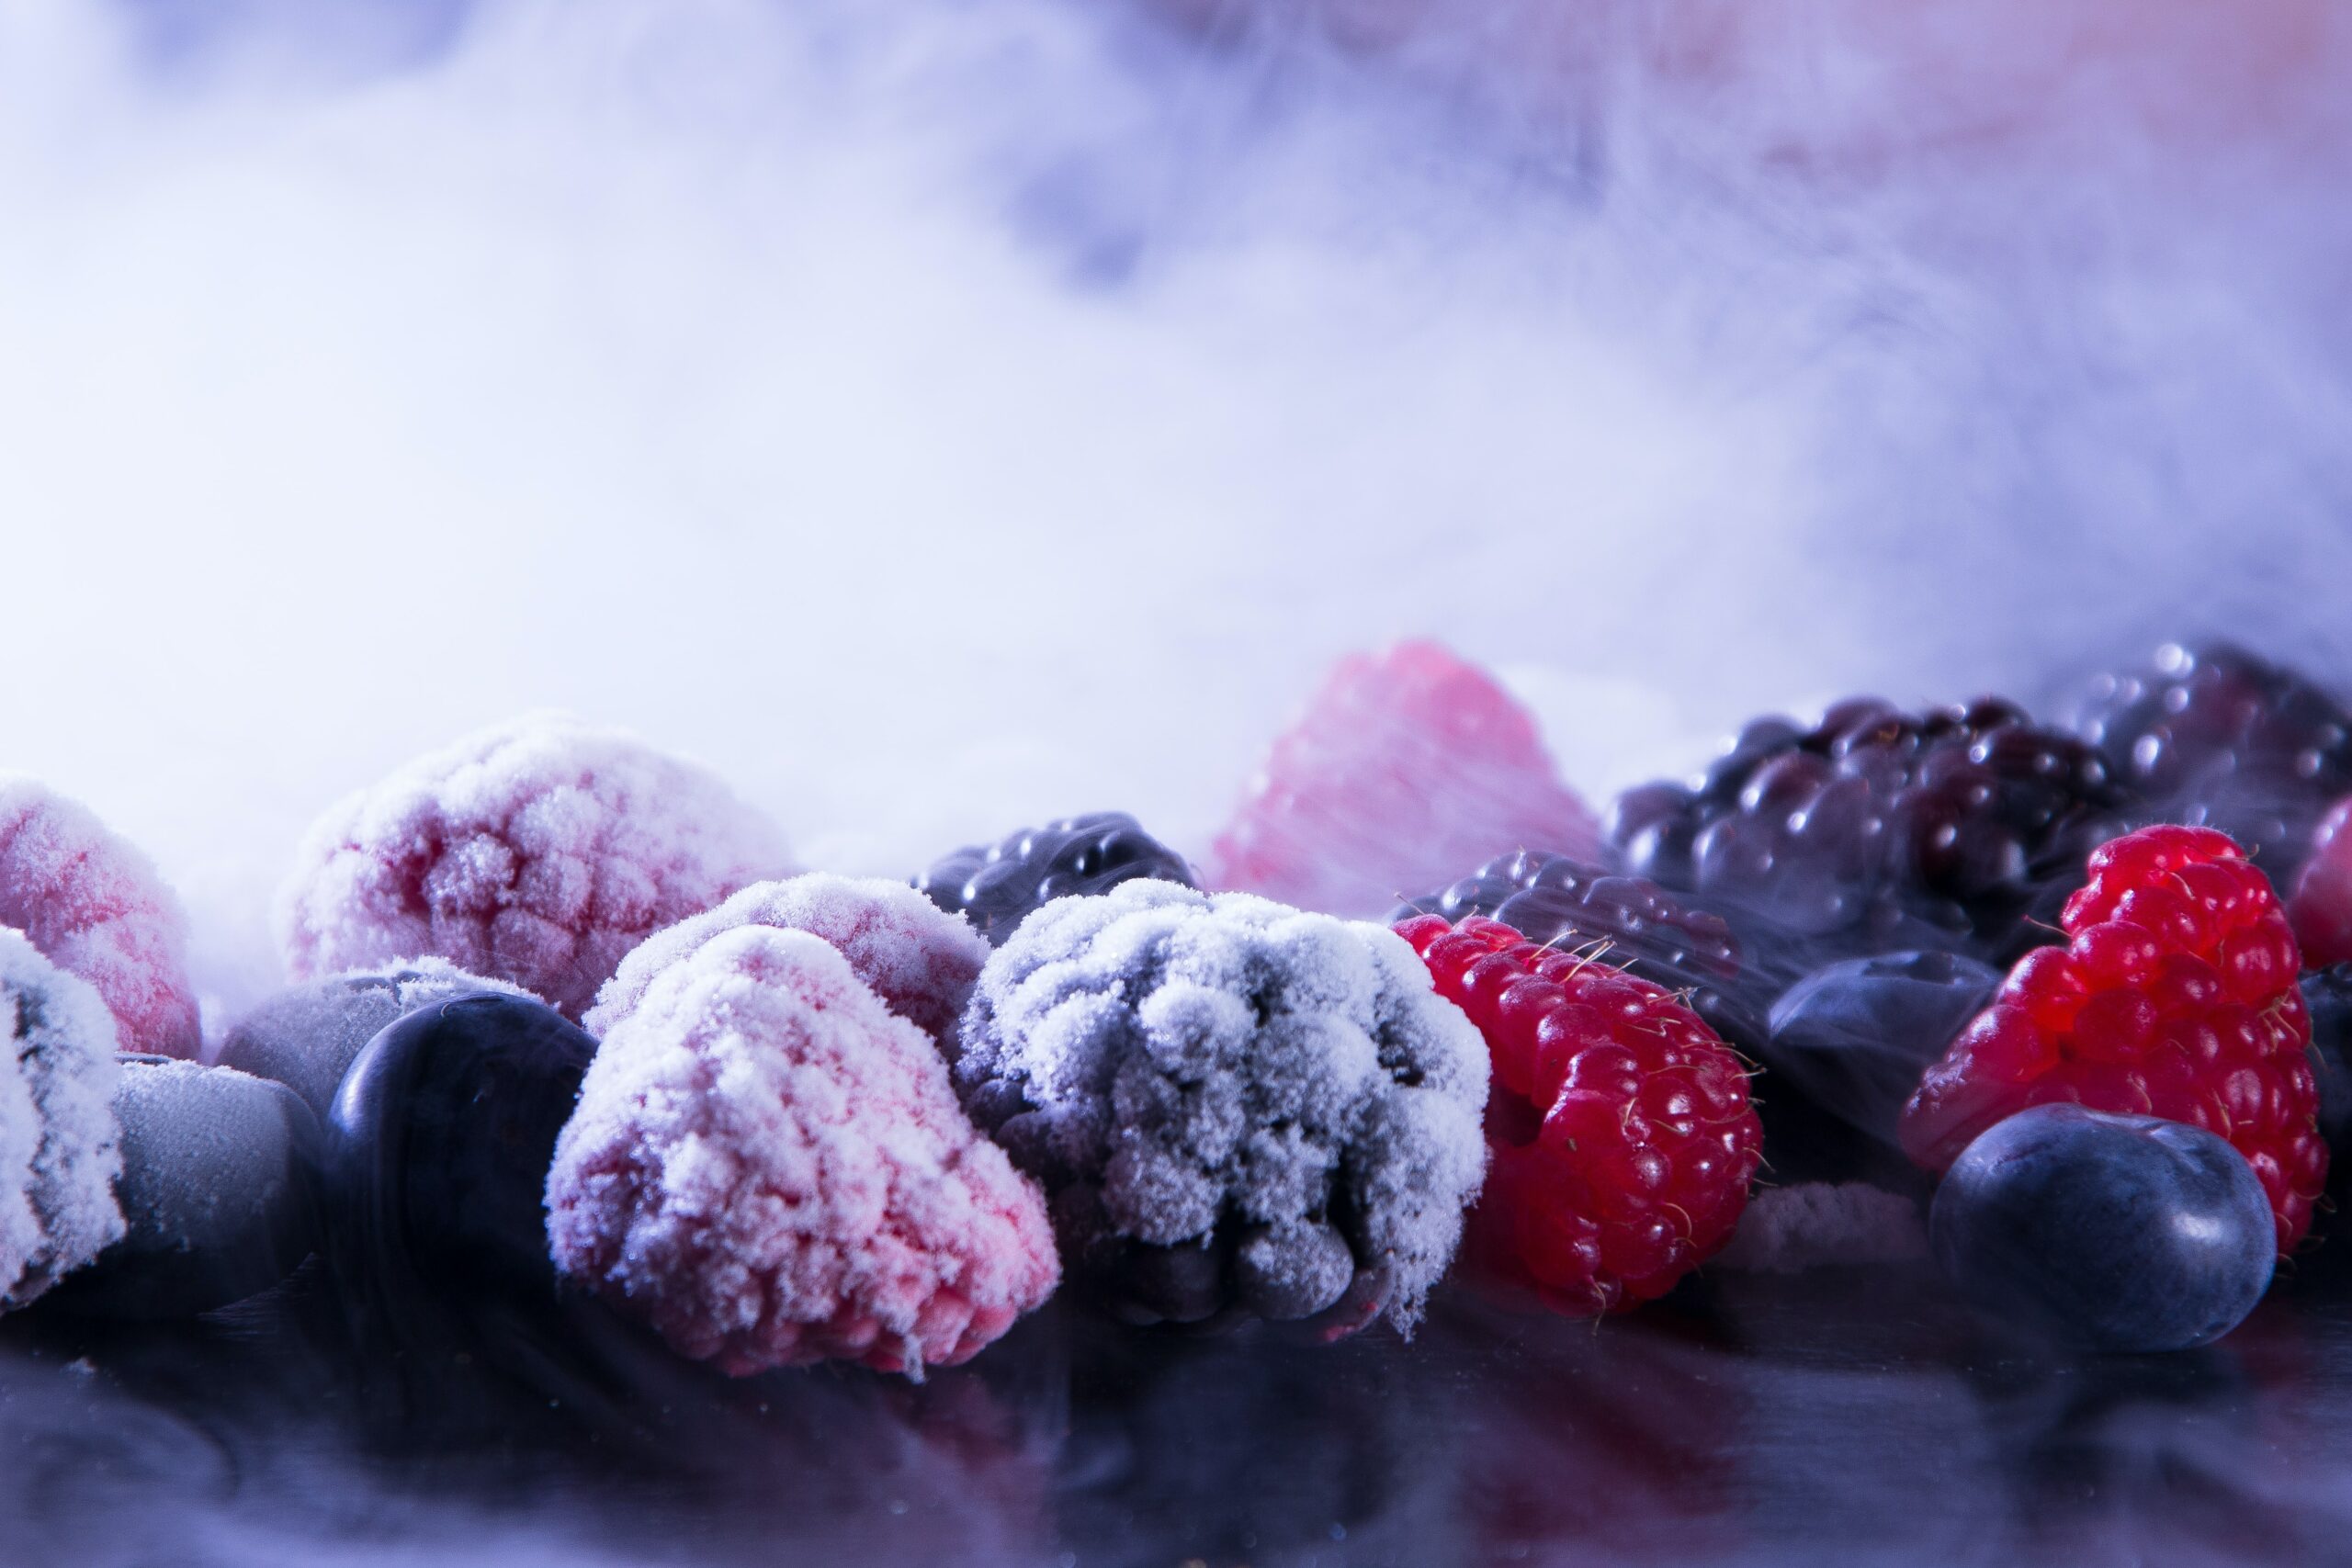 What Are Dry Ice Frozen Items?